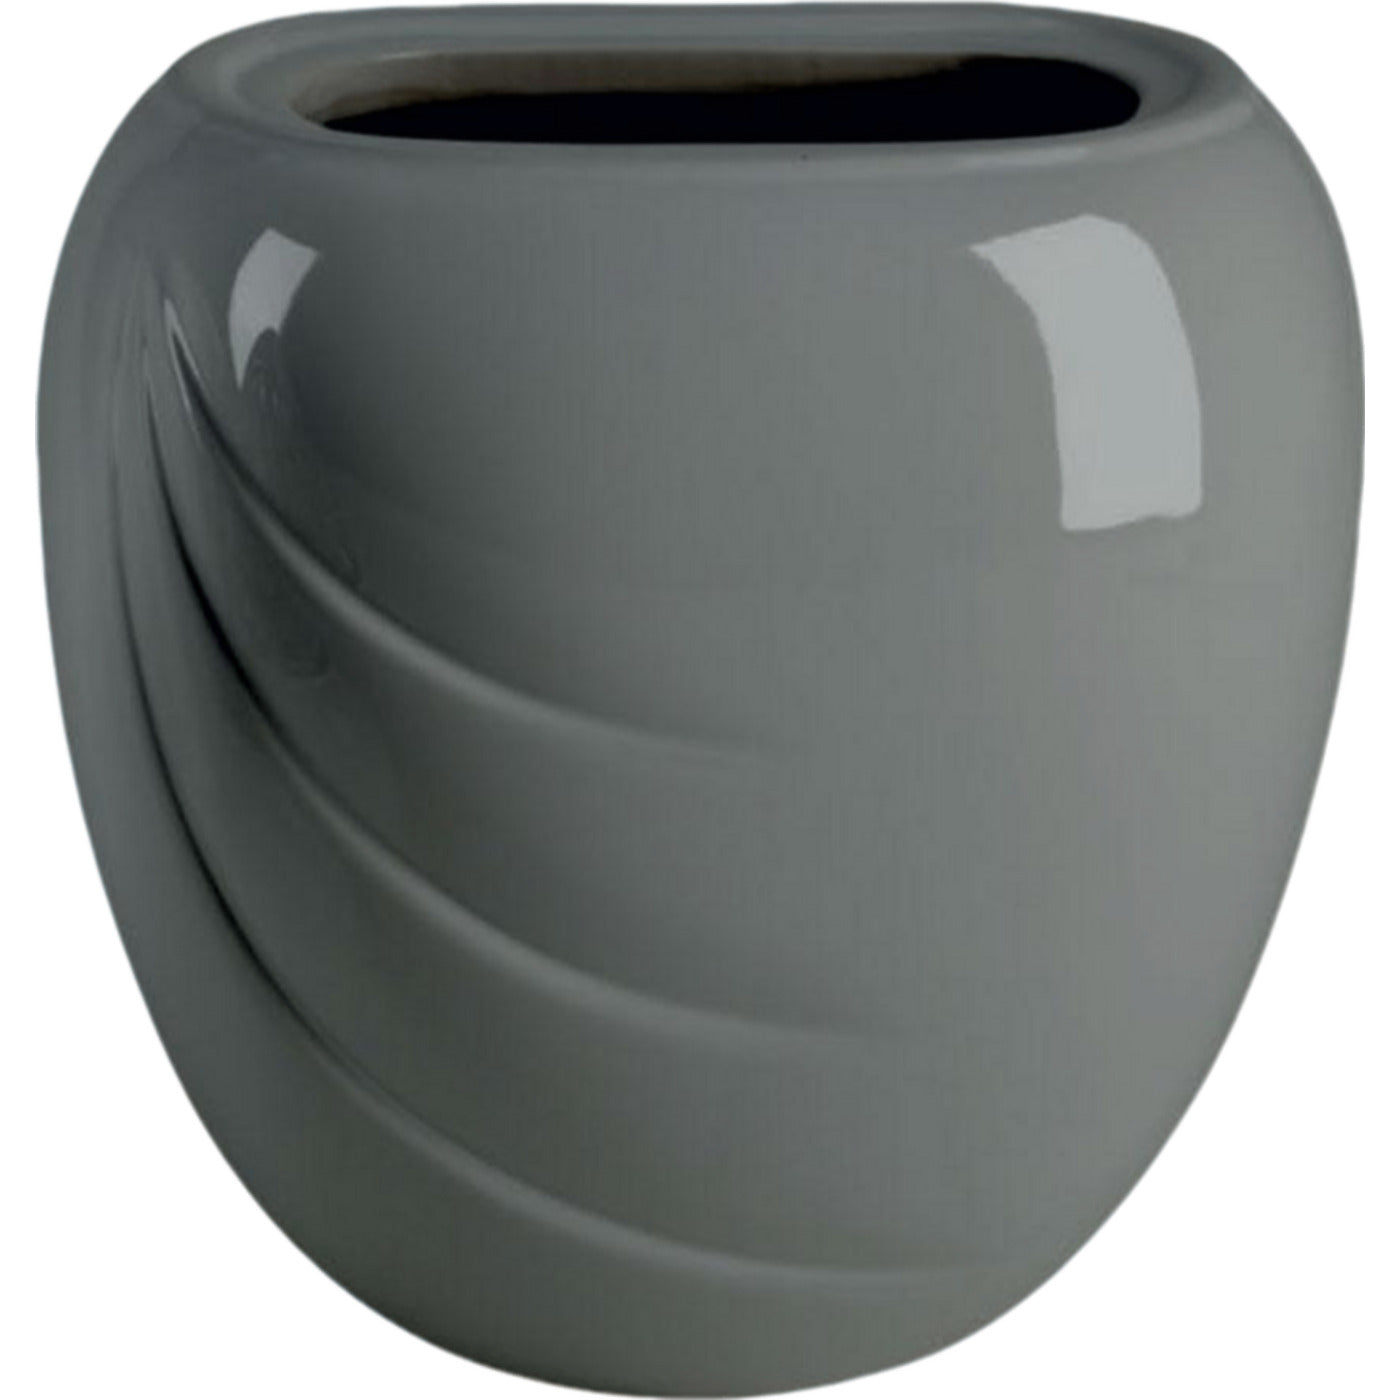 Rectangular grave vase Ecotre gray 19x17cm - 7.5x6.7in In gray porcelain, wall attached ECO148P/G